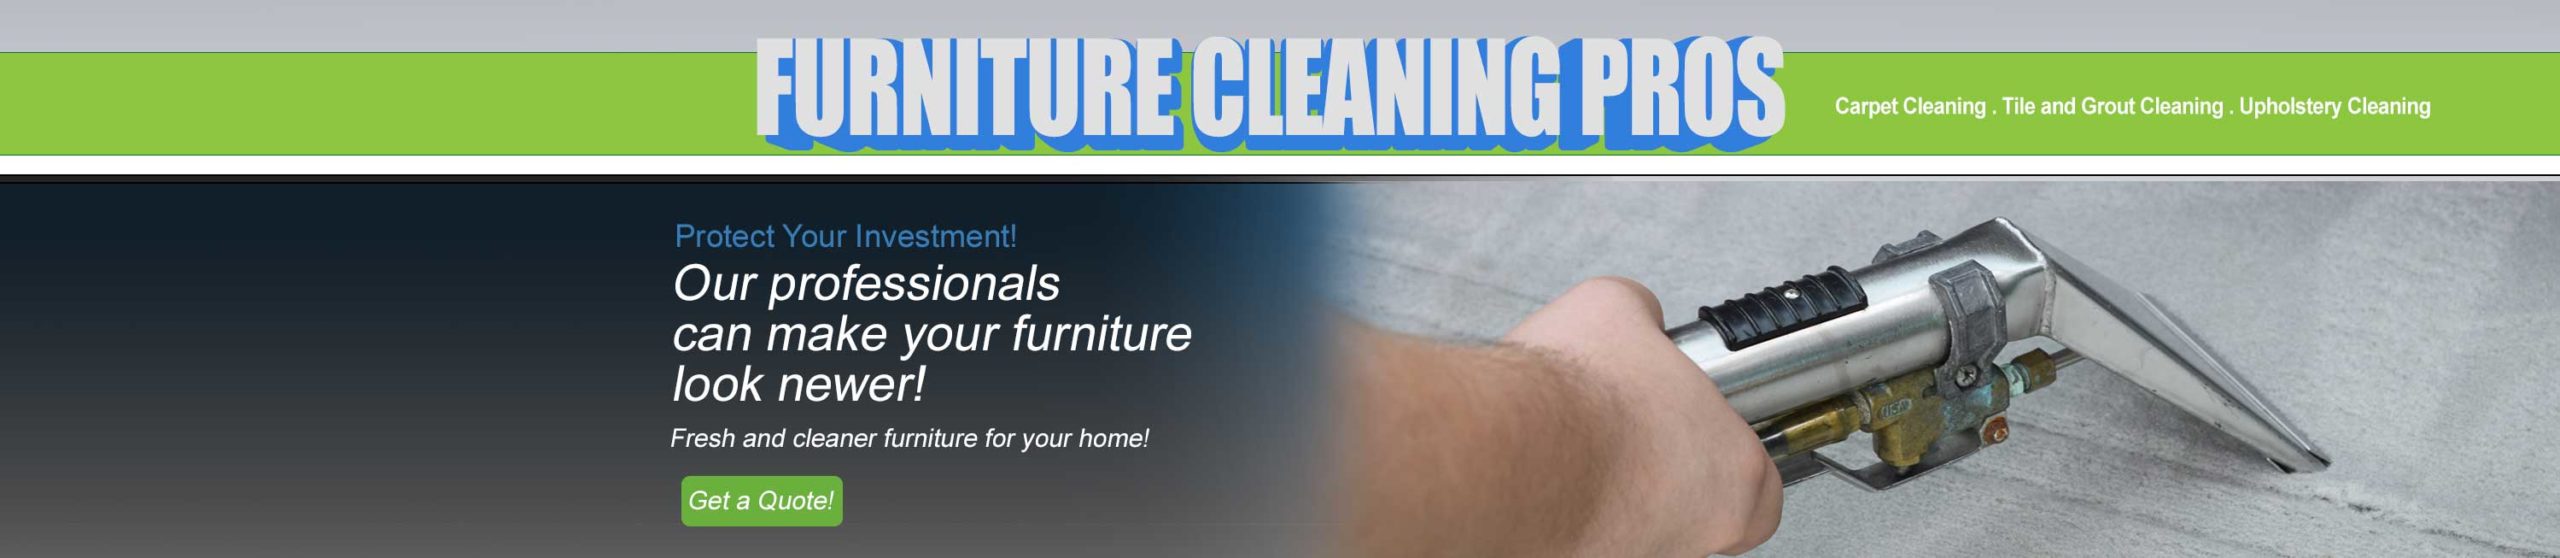 Furniture and upholstery cleaning in Laveen AZ